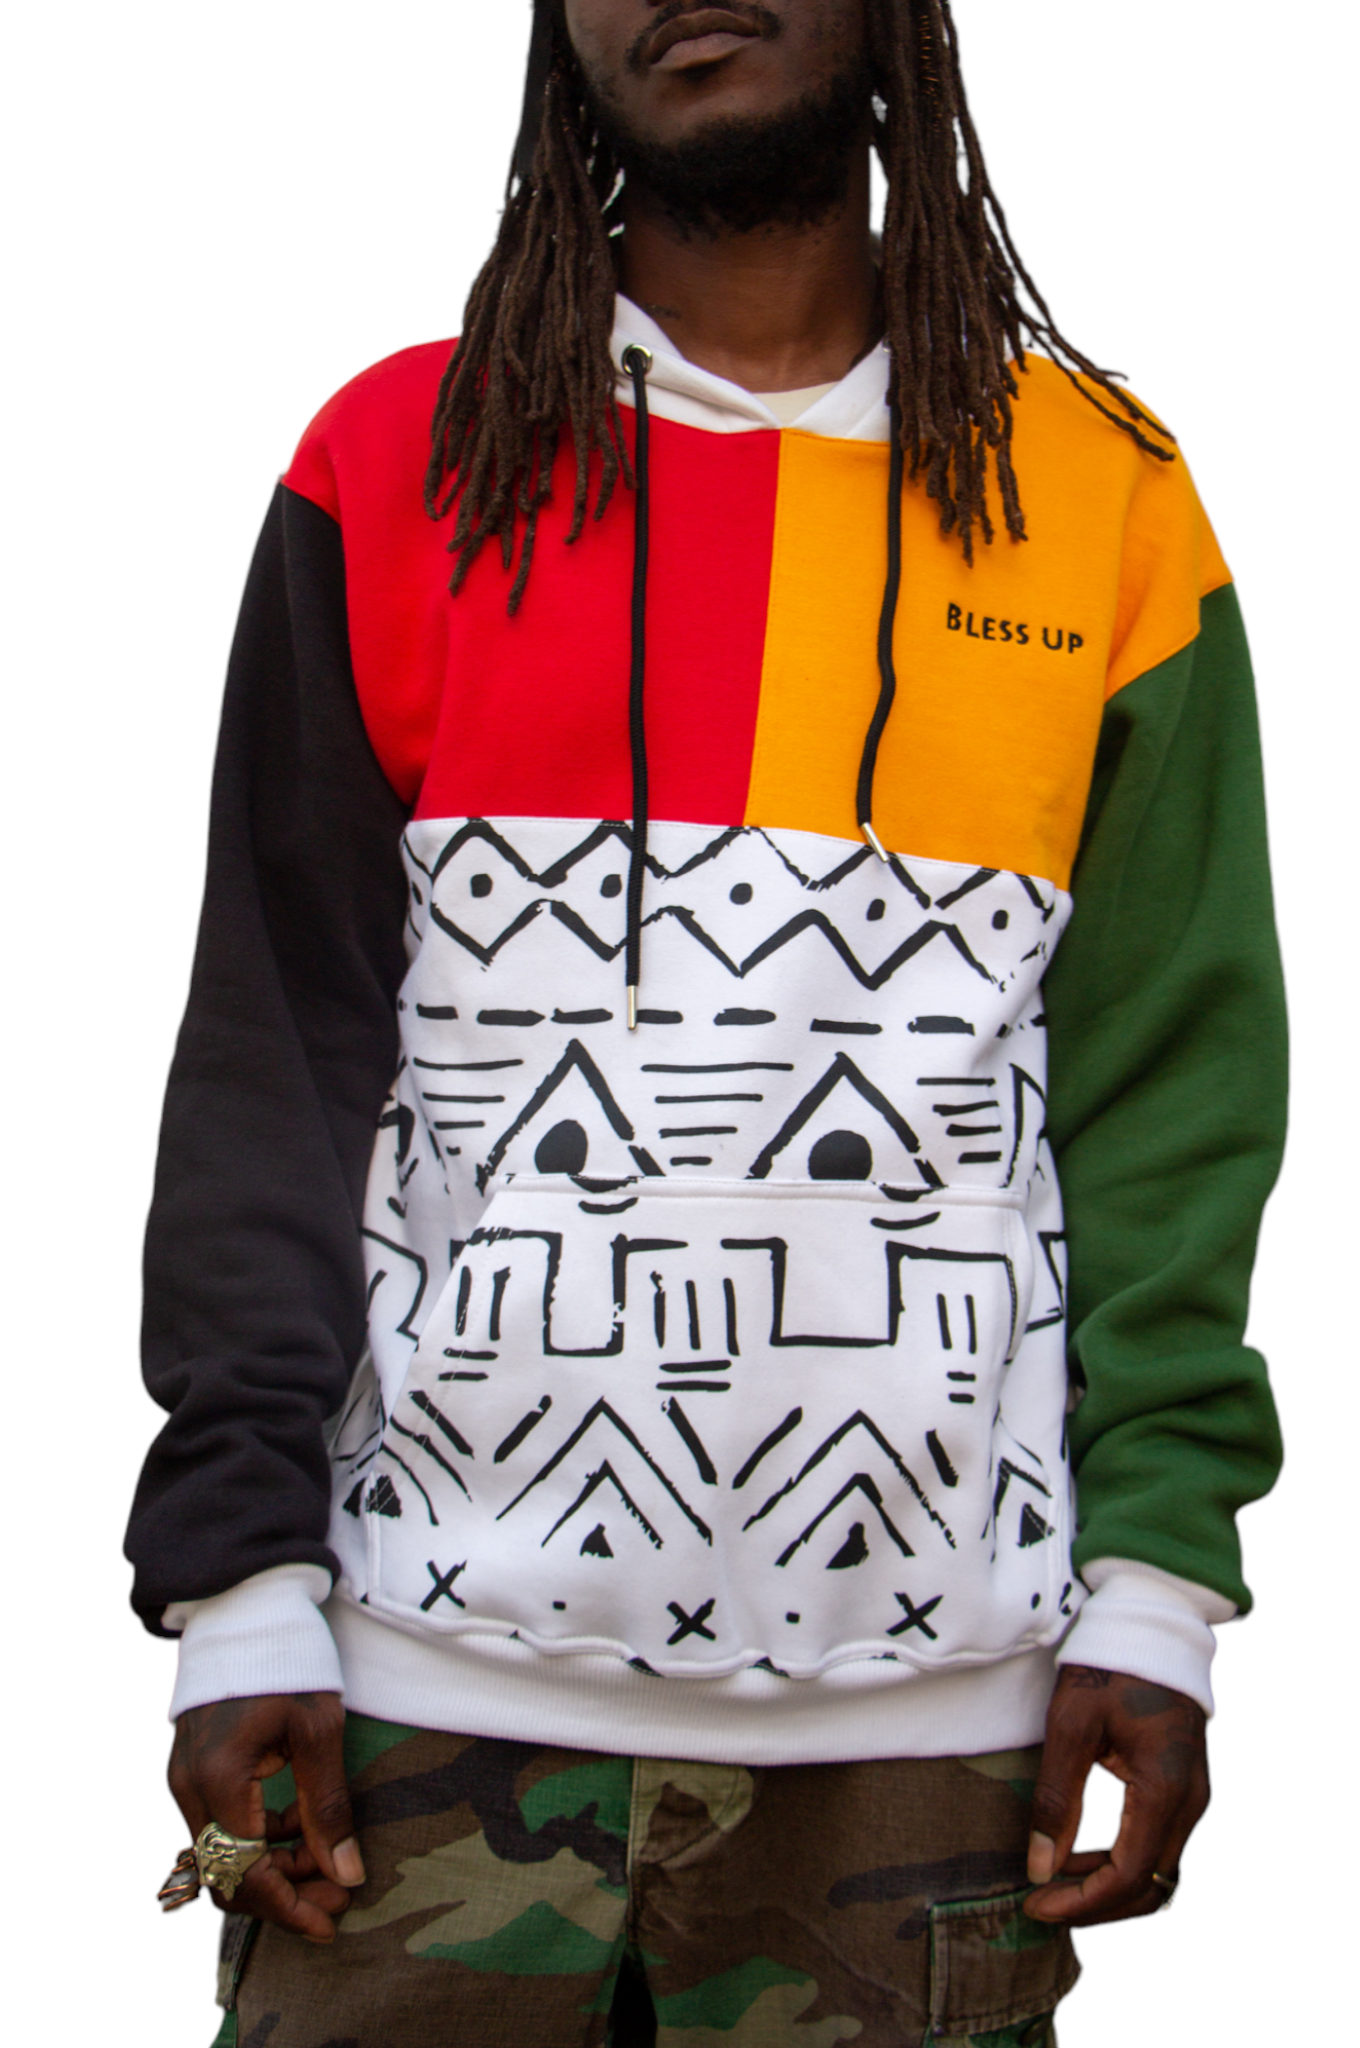 The Bless Up Hoodie - Ragtribe Ethical Clothing & Productions, LLC